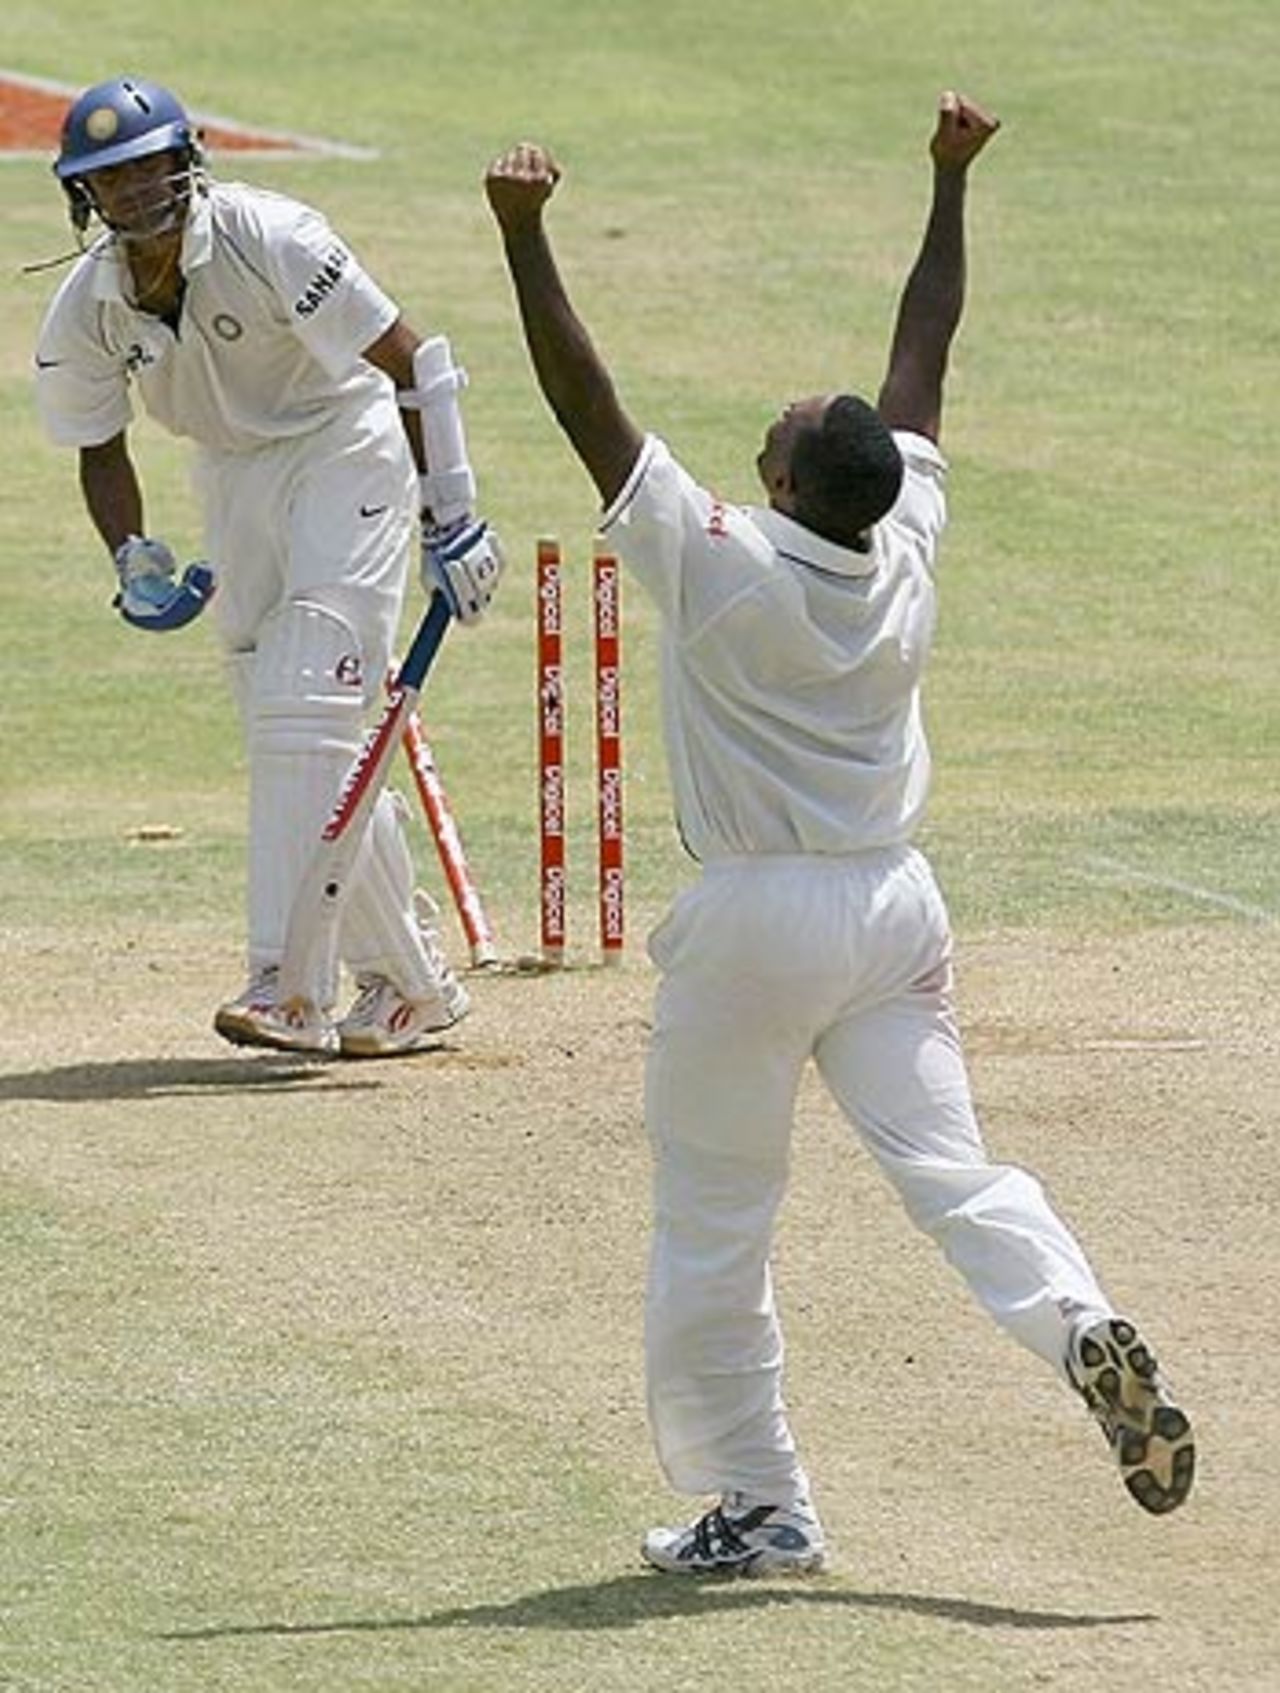 Corey Collymore celebrates after bowling Rahul Dravid, West Indies v India, 4th Test, Jamaica, 3rd day, July 2, 2006